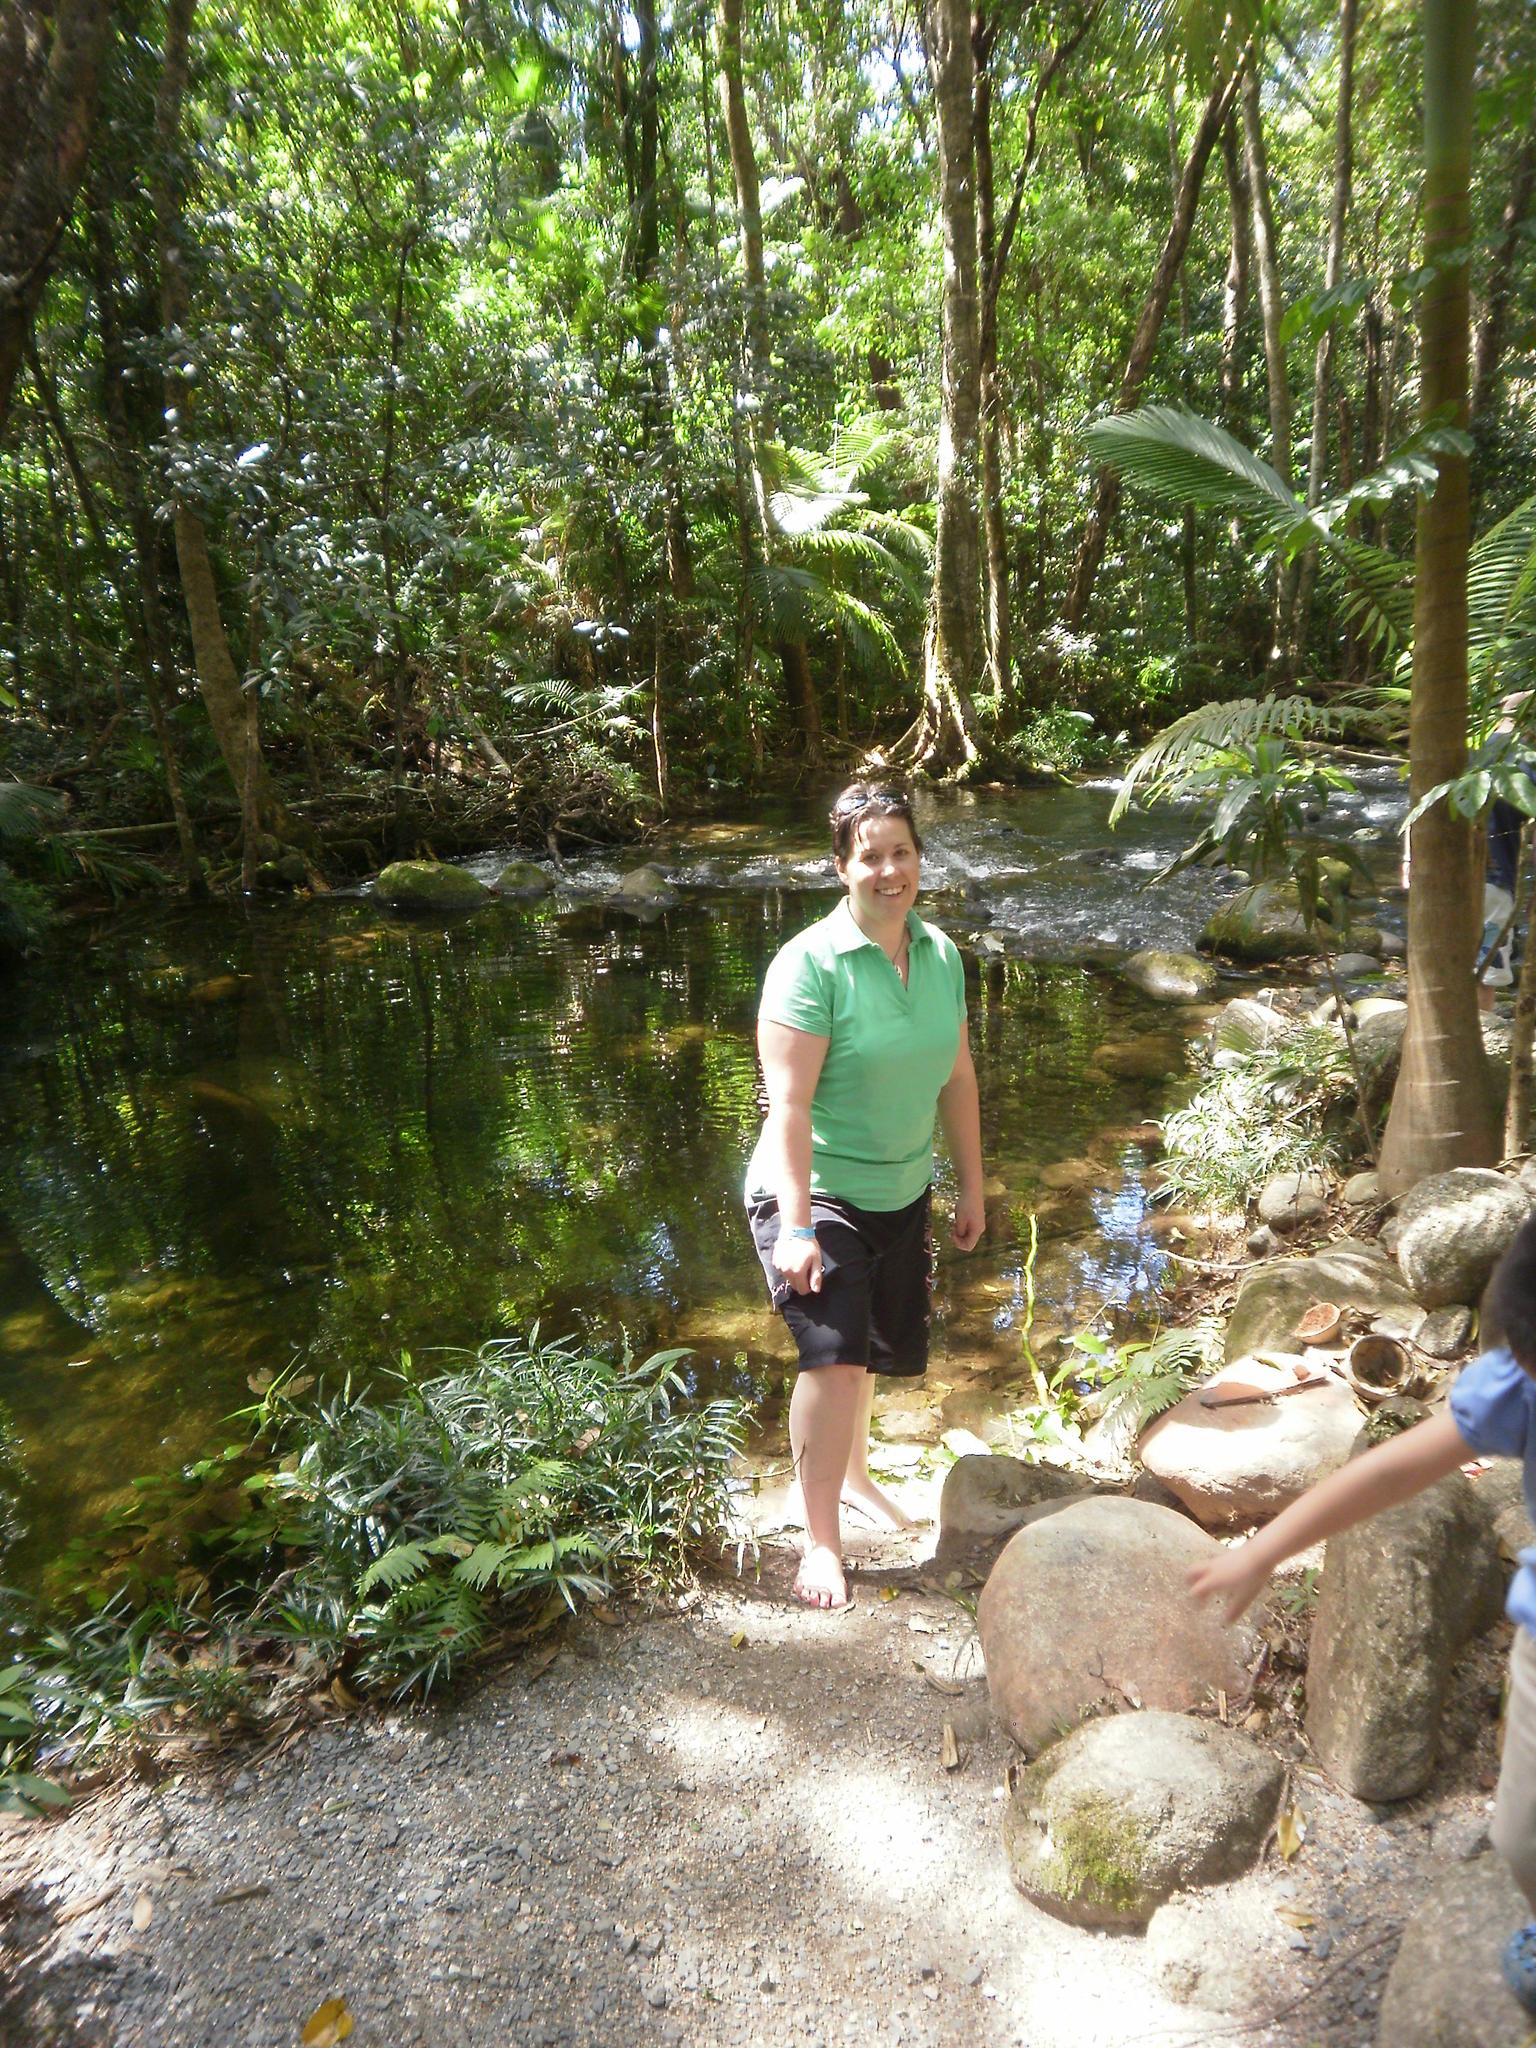 The little private part of Mossman Gorge we got taken to.